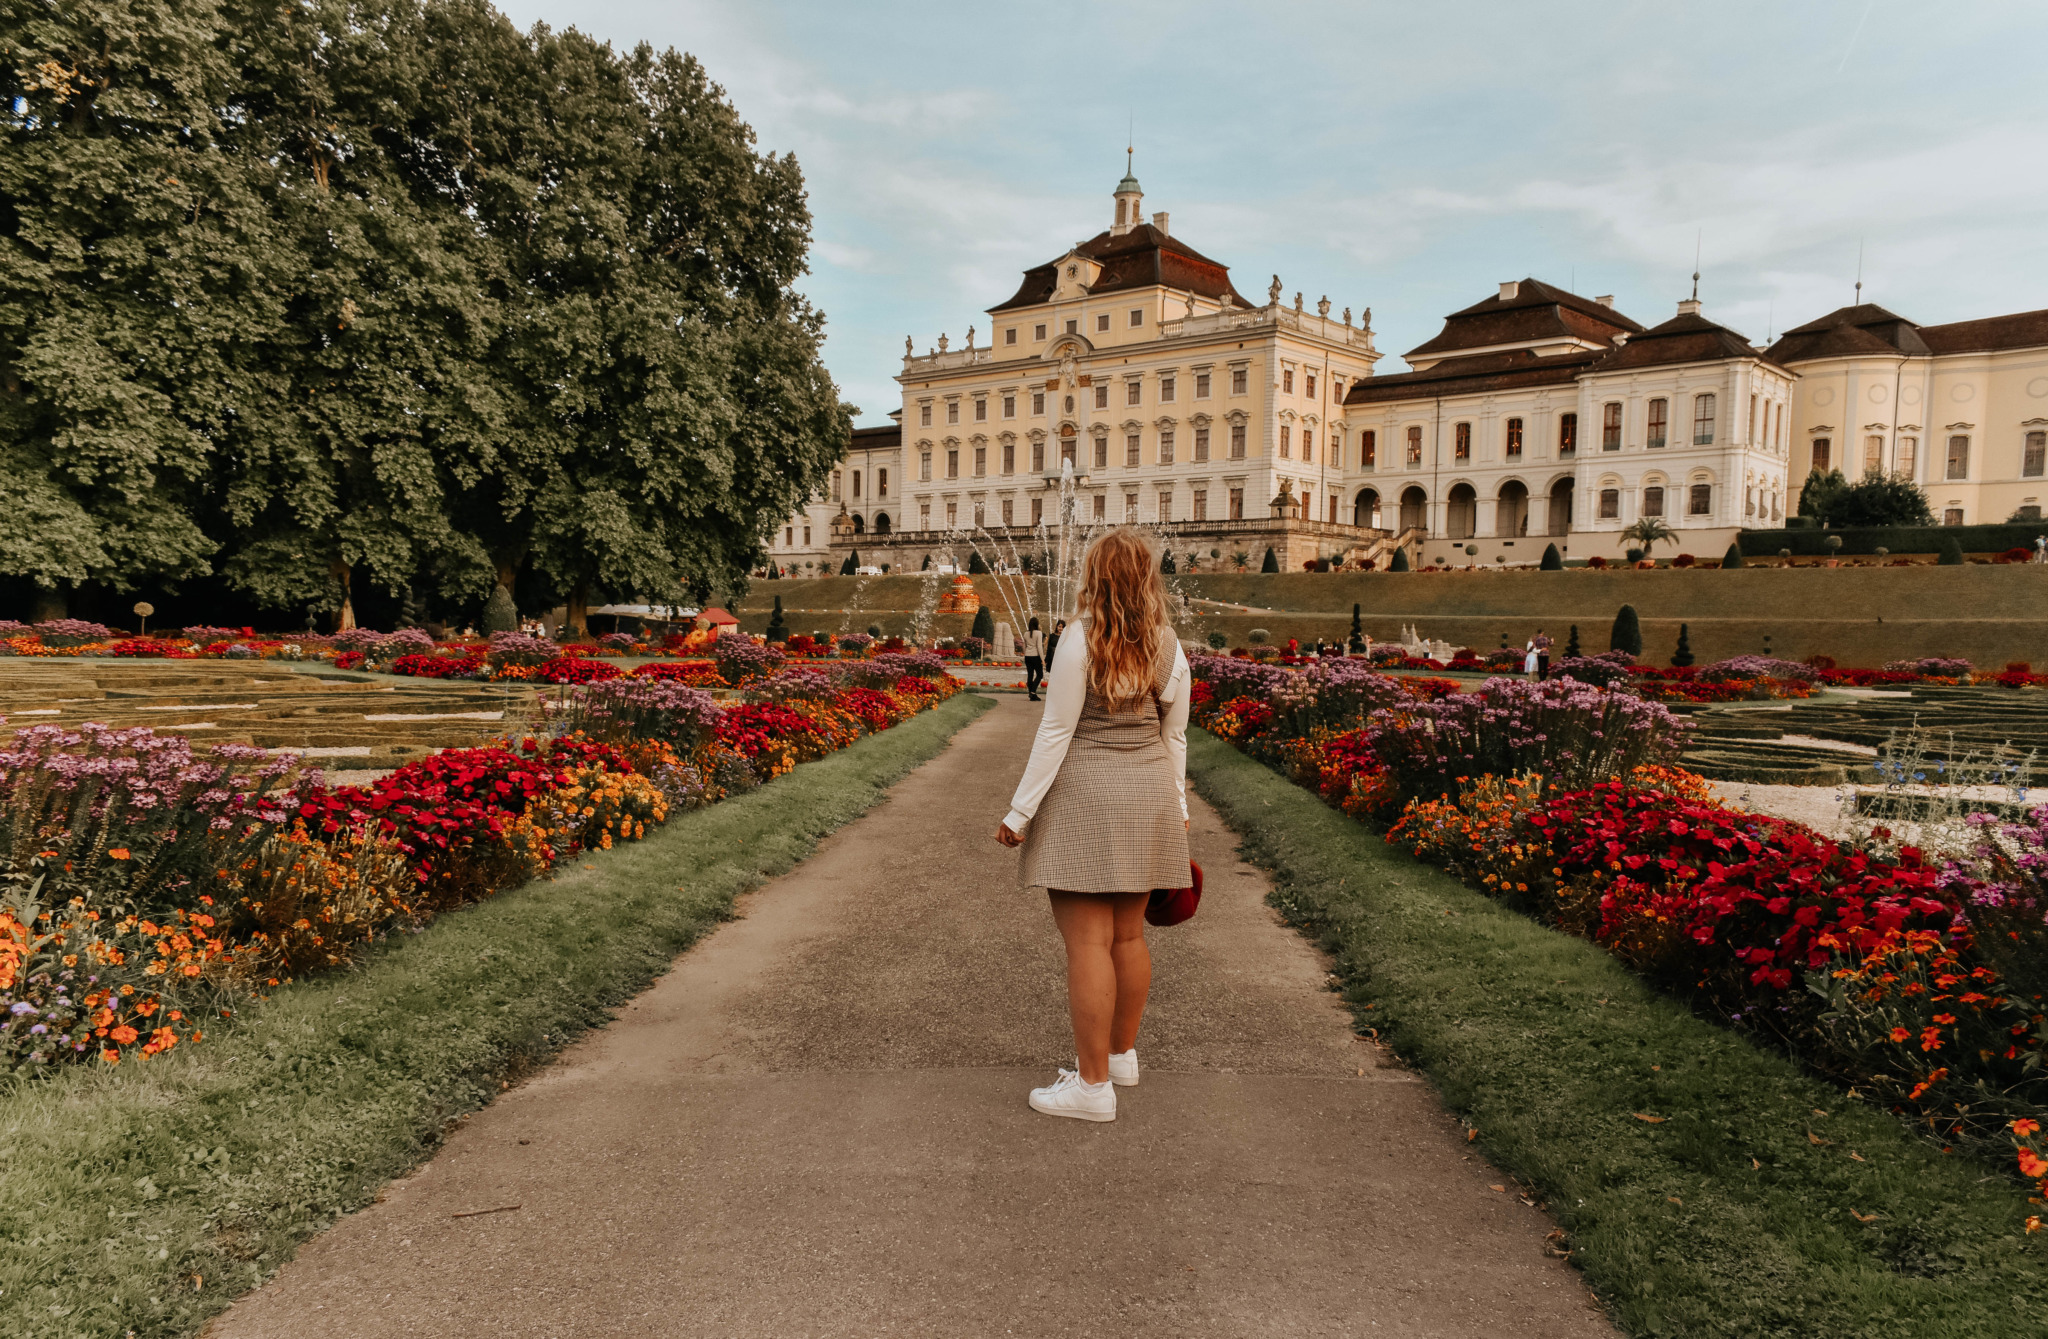 breathtaking Ludwigsburg Palace with blooming colorful flowers